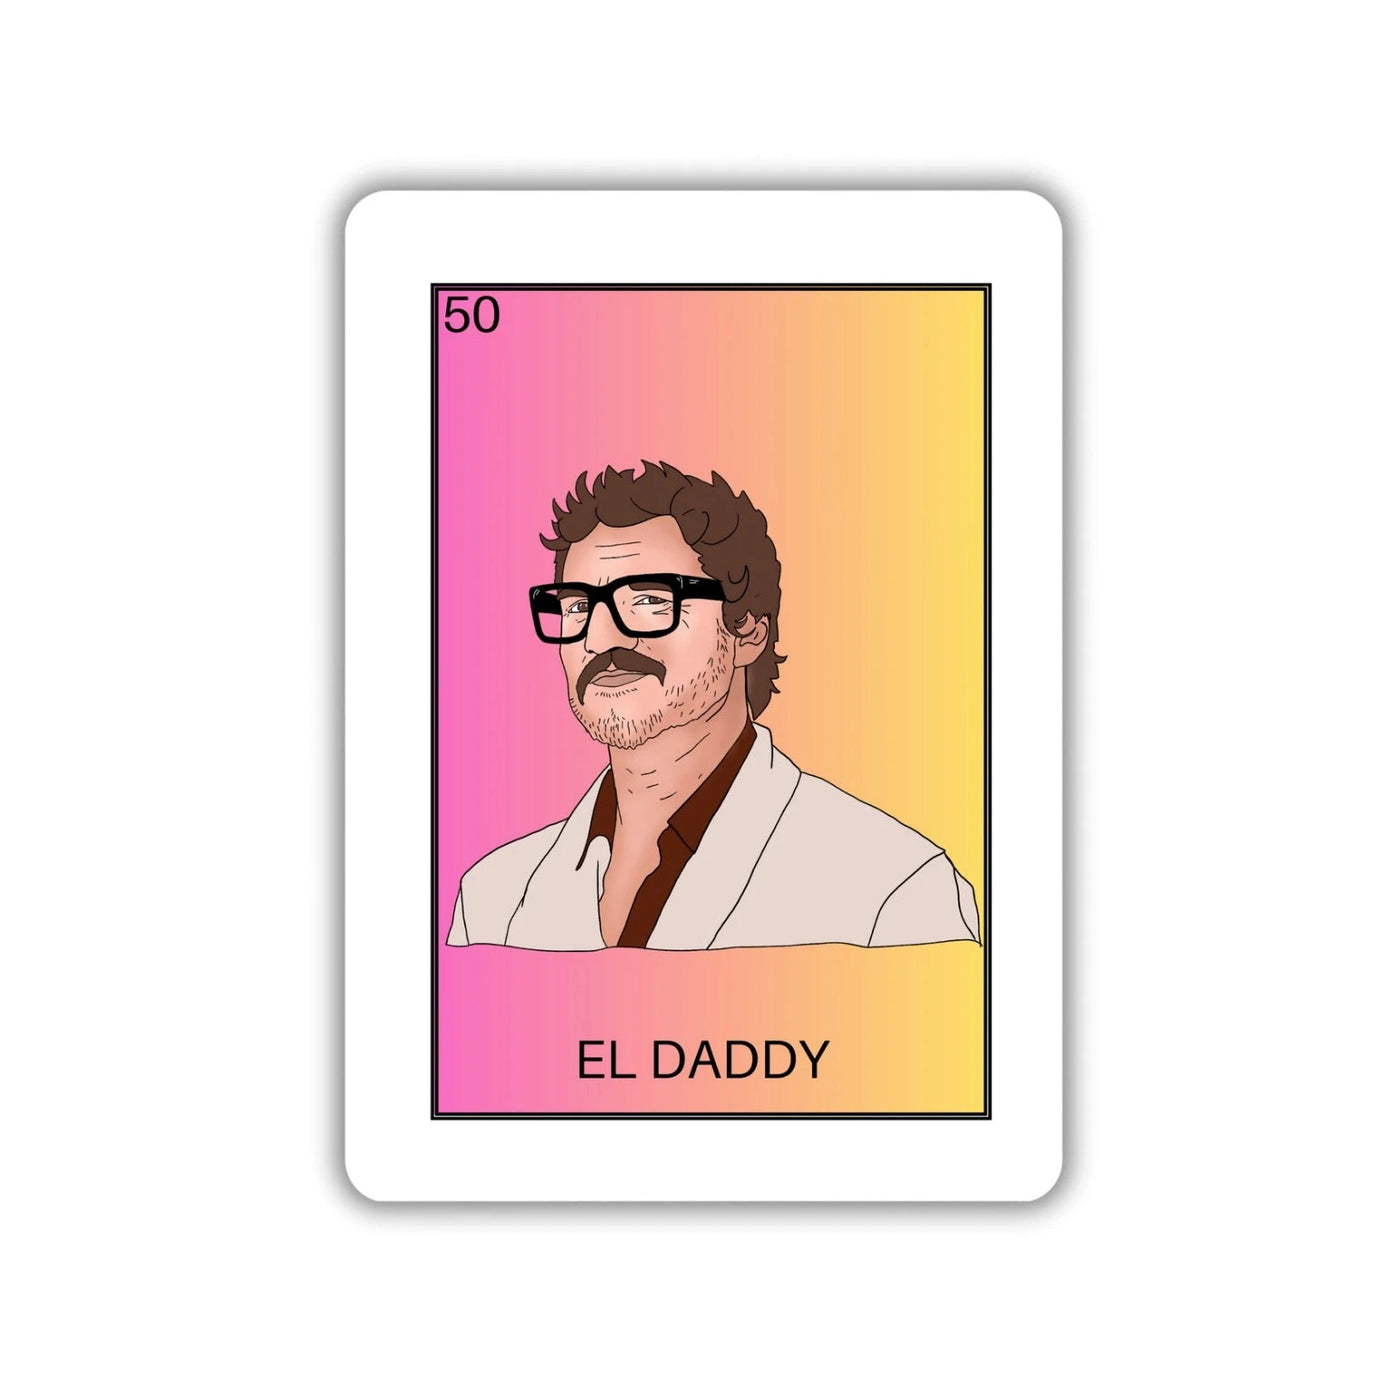 An illustration of Pedro Pascal wearing white blazer, maroon shirt and black glasses with a loteria card style border.